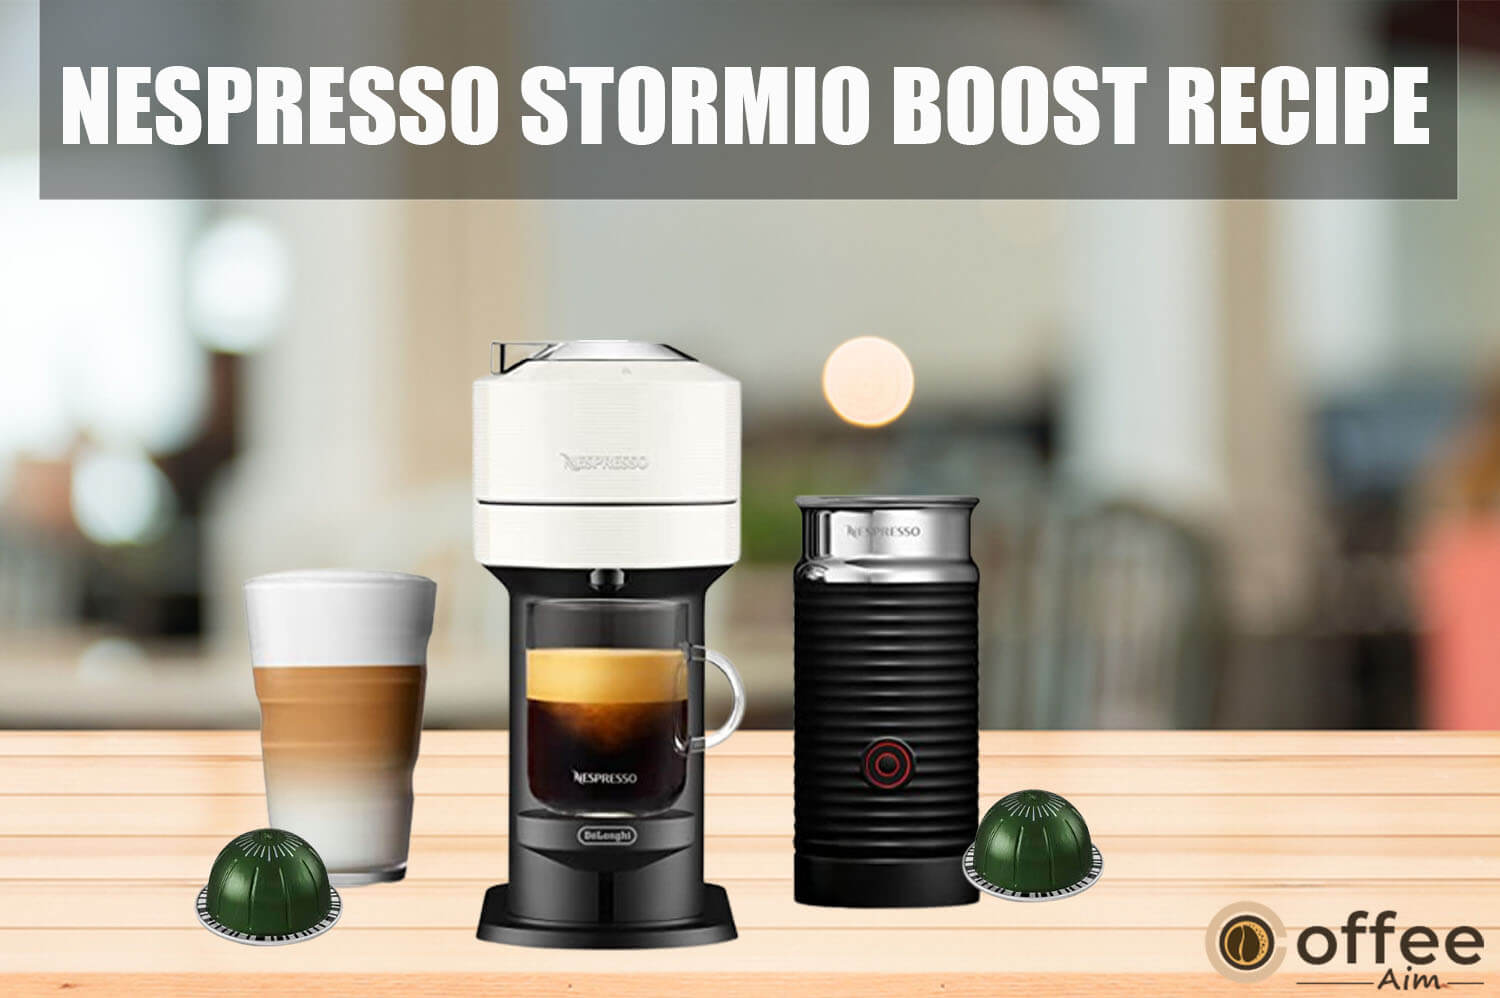 Featured image for the article "Nespresso stormio boost recipe"